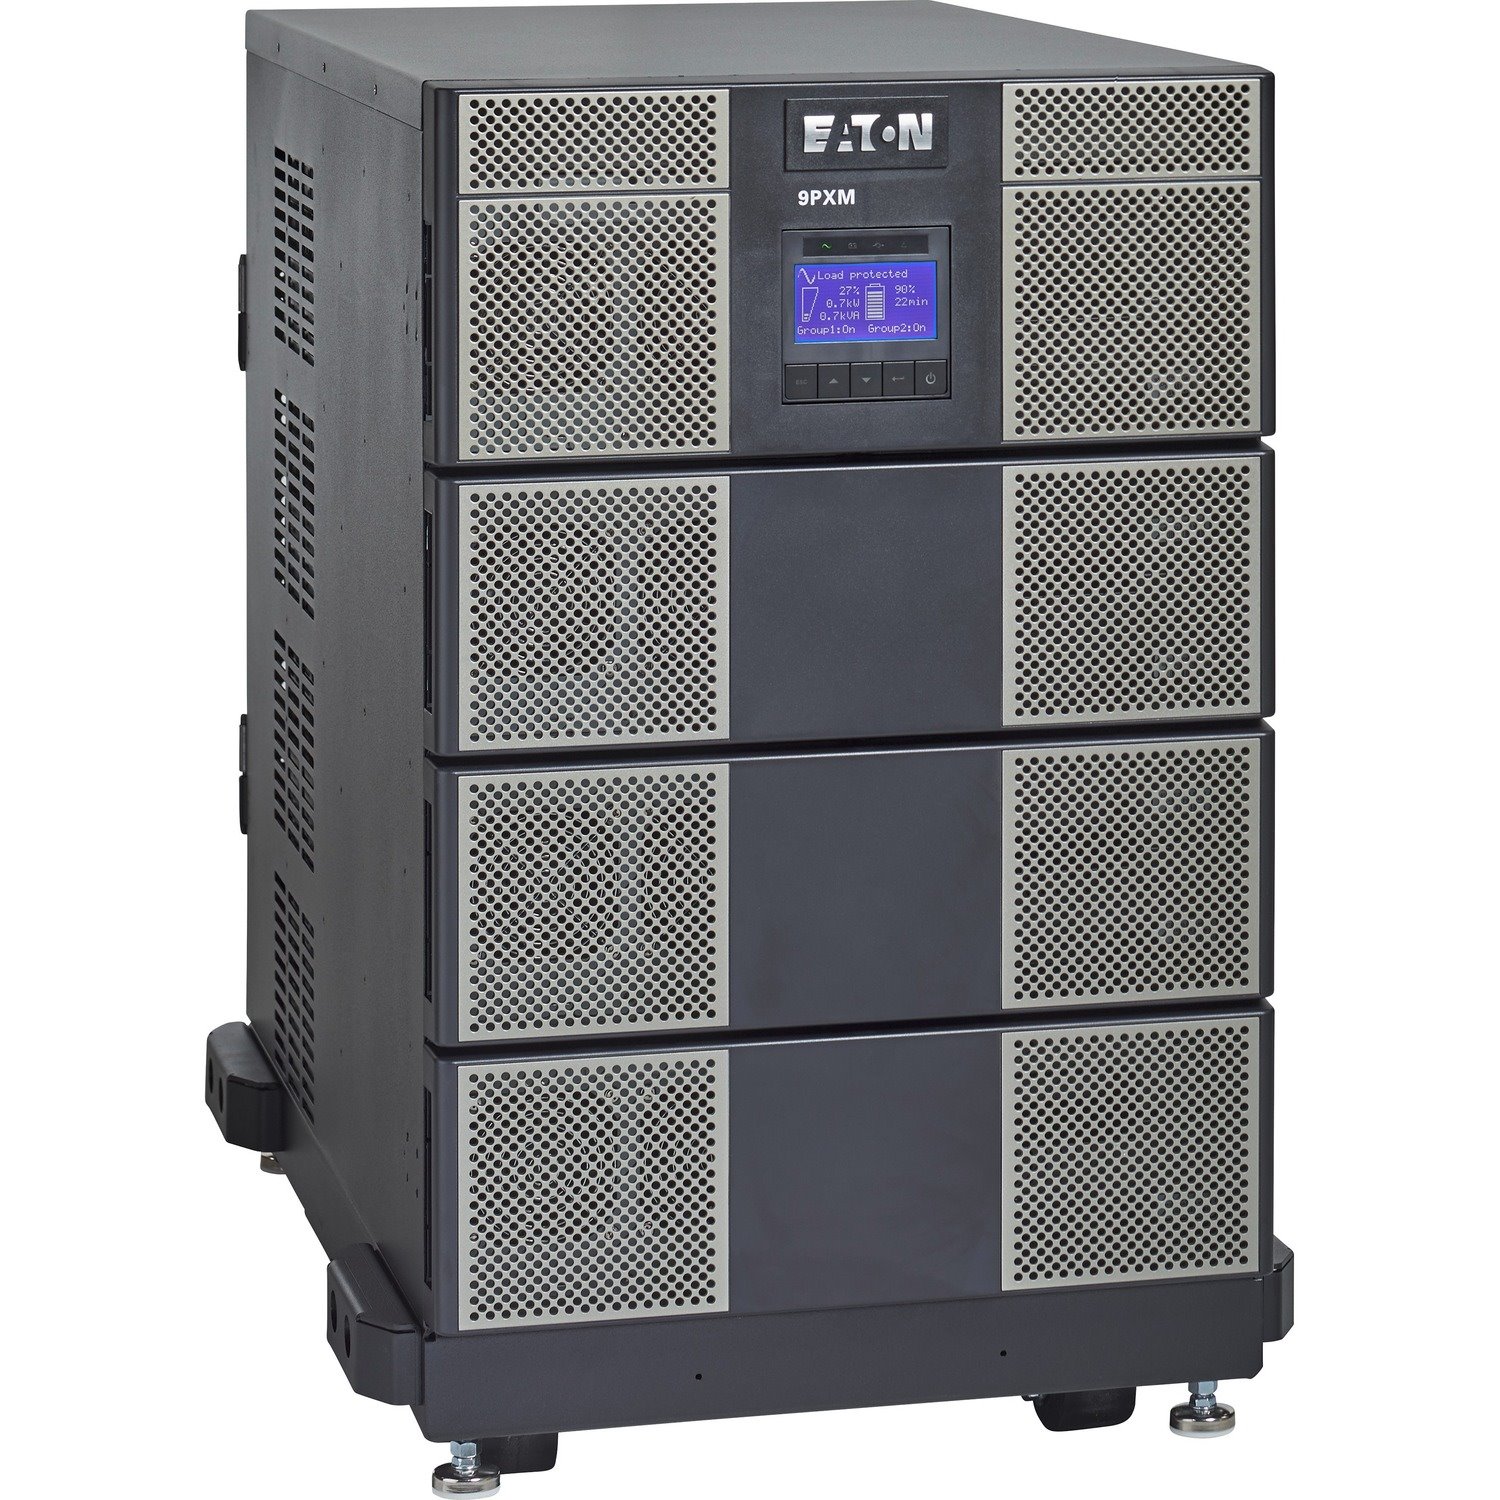 Eaton 9PXM UPS 12kVA 10.8kW 208-240V N+1 Modular Scalable Online Double-Conversion UPS, Hardwired Input / Output, 14U